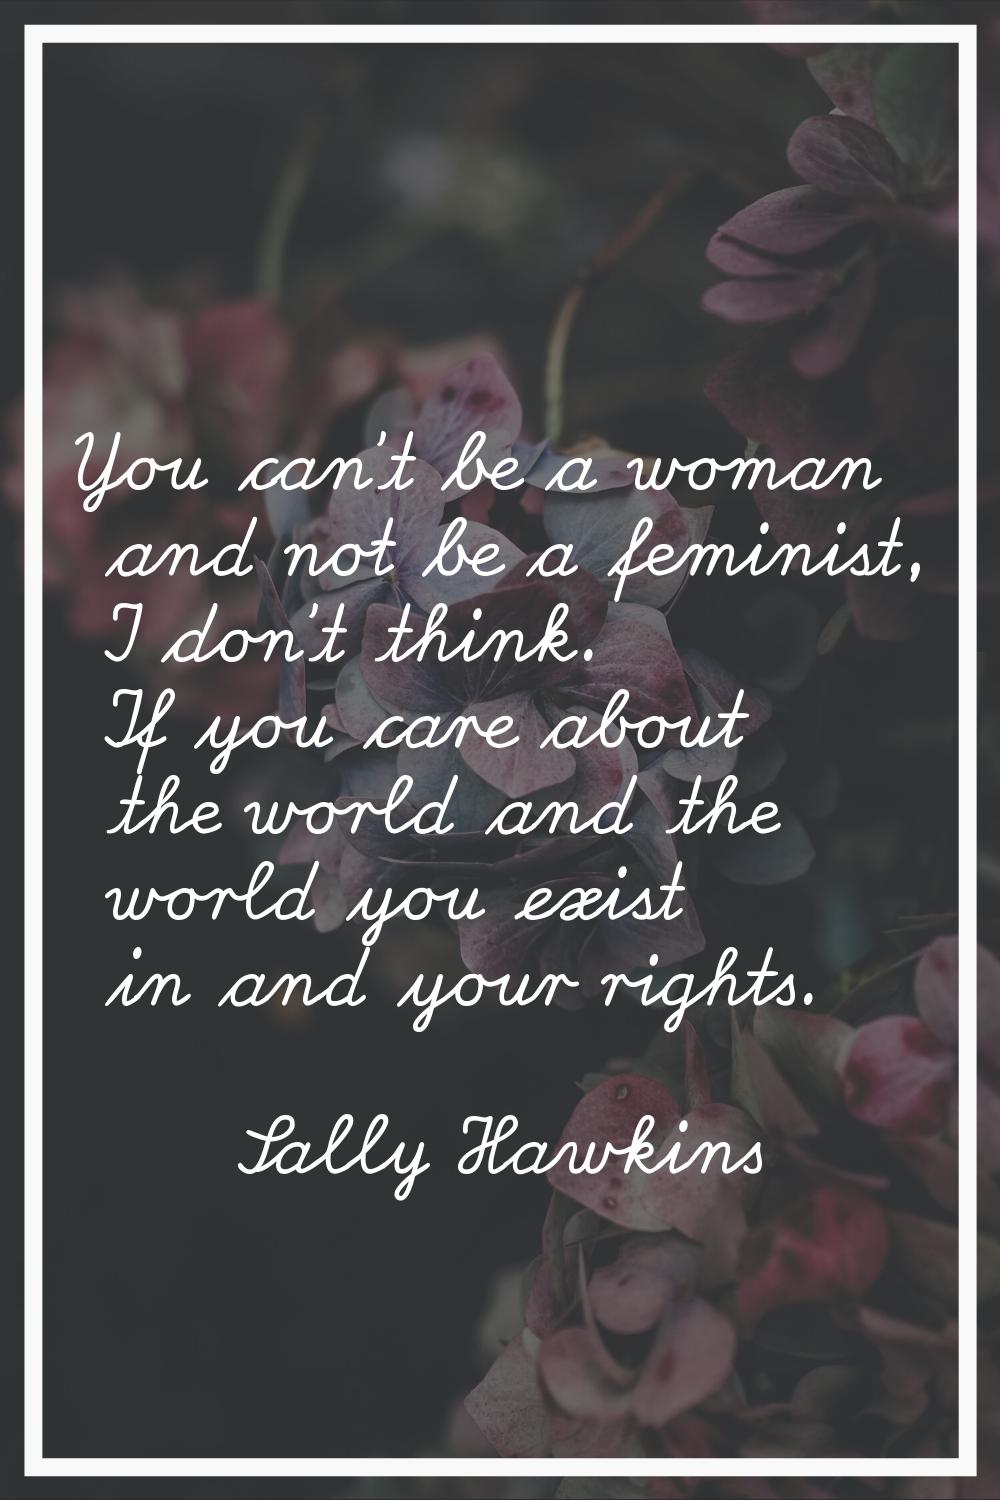 You can't be a woman and not be a feminist, I don't think. If you care about the world and the worl